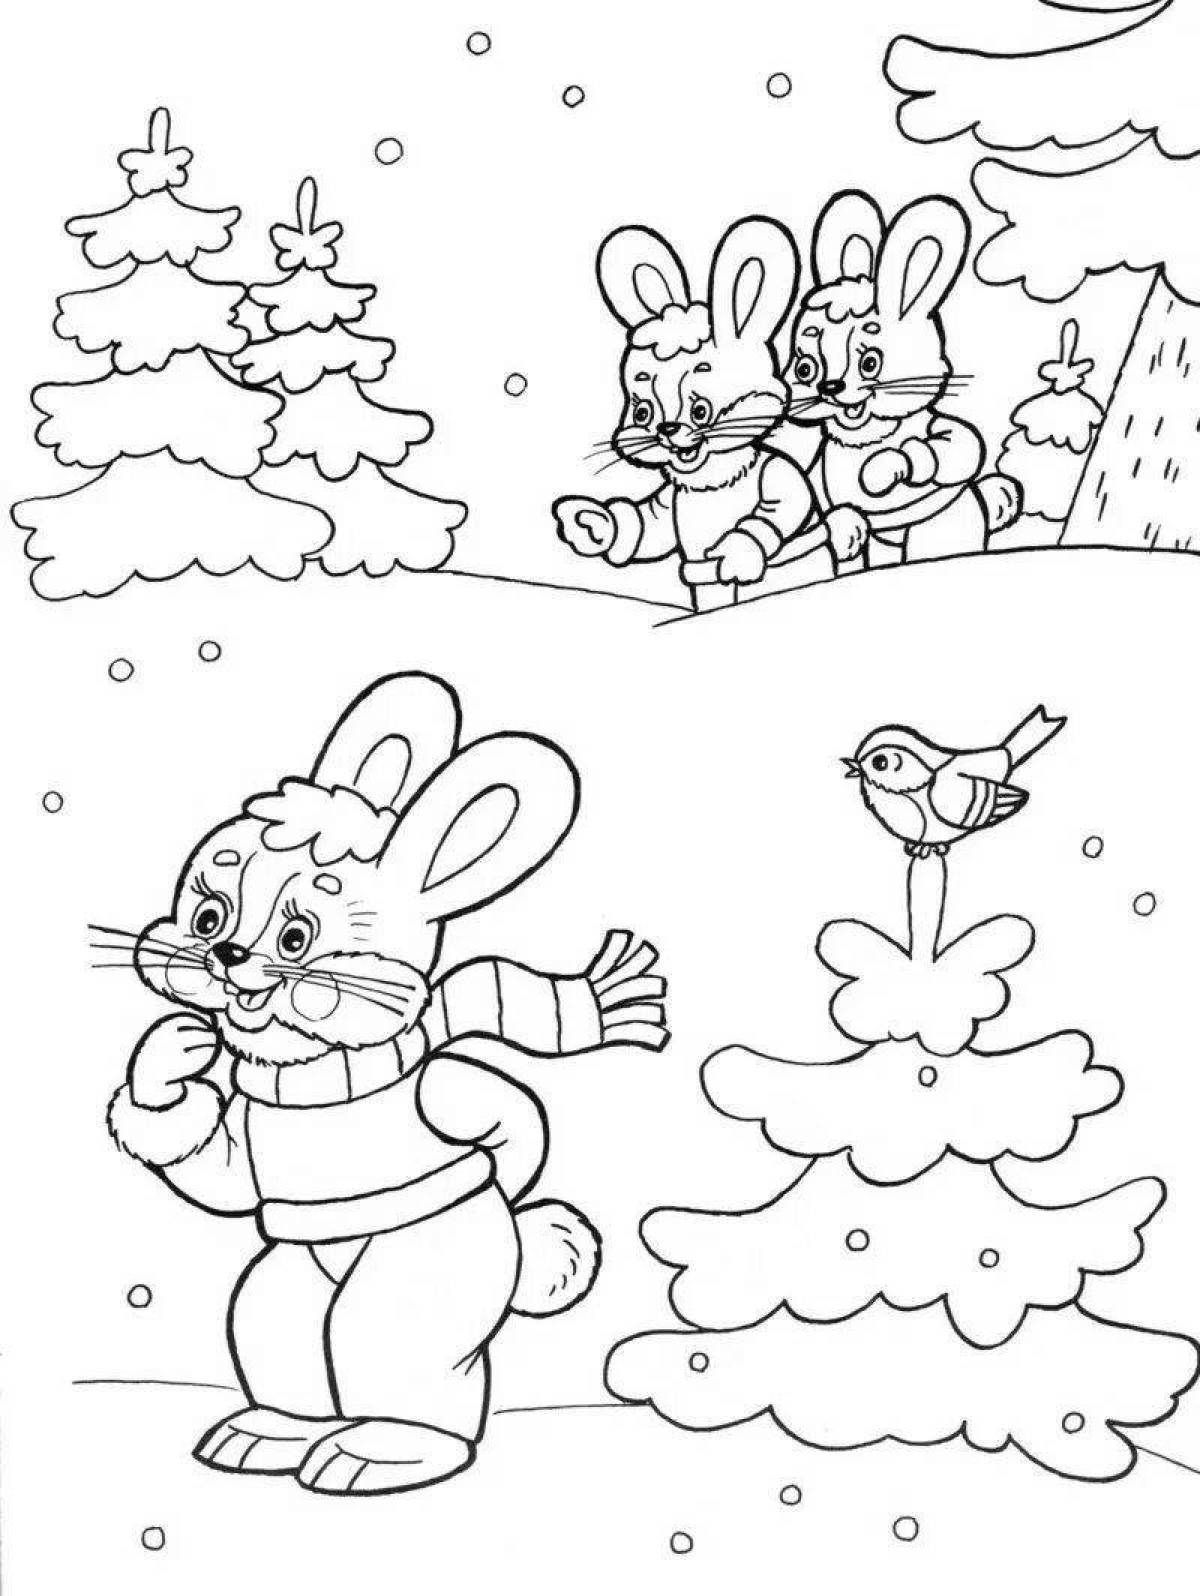 Live winter coloring book for children 6-7 years old